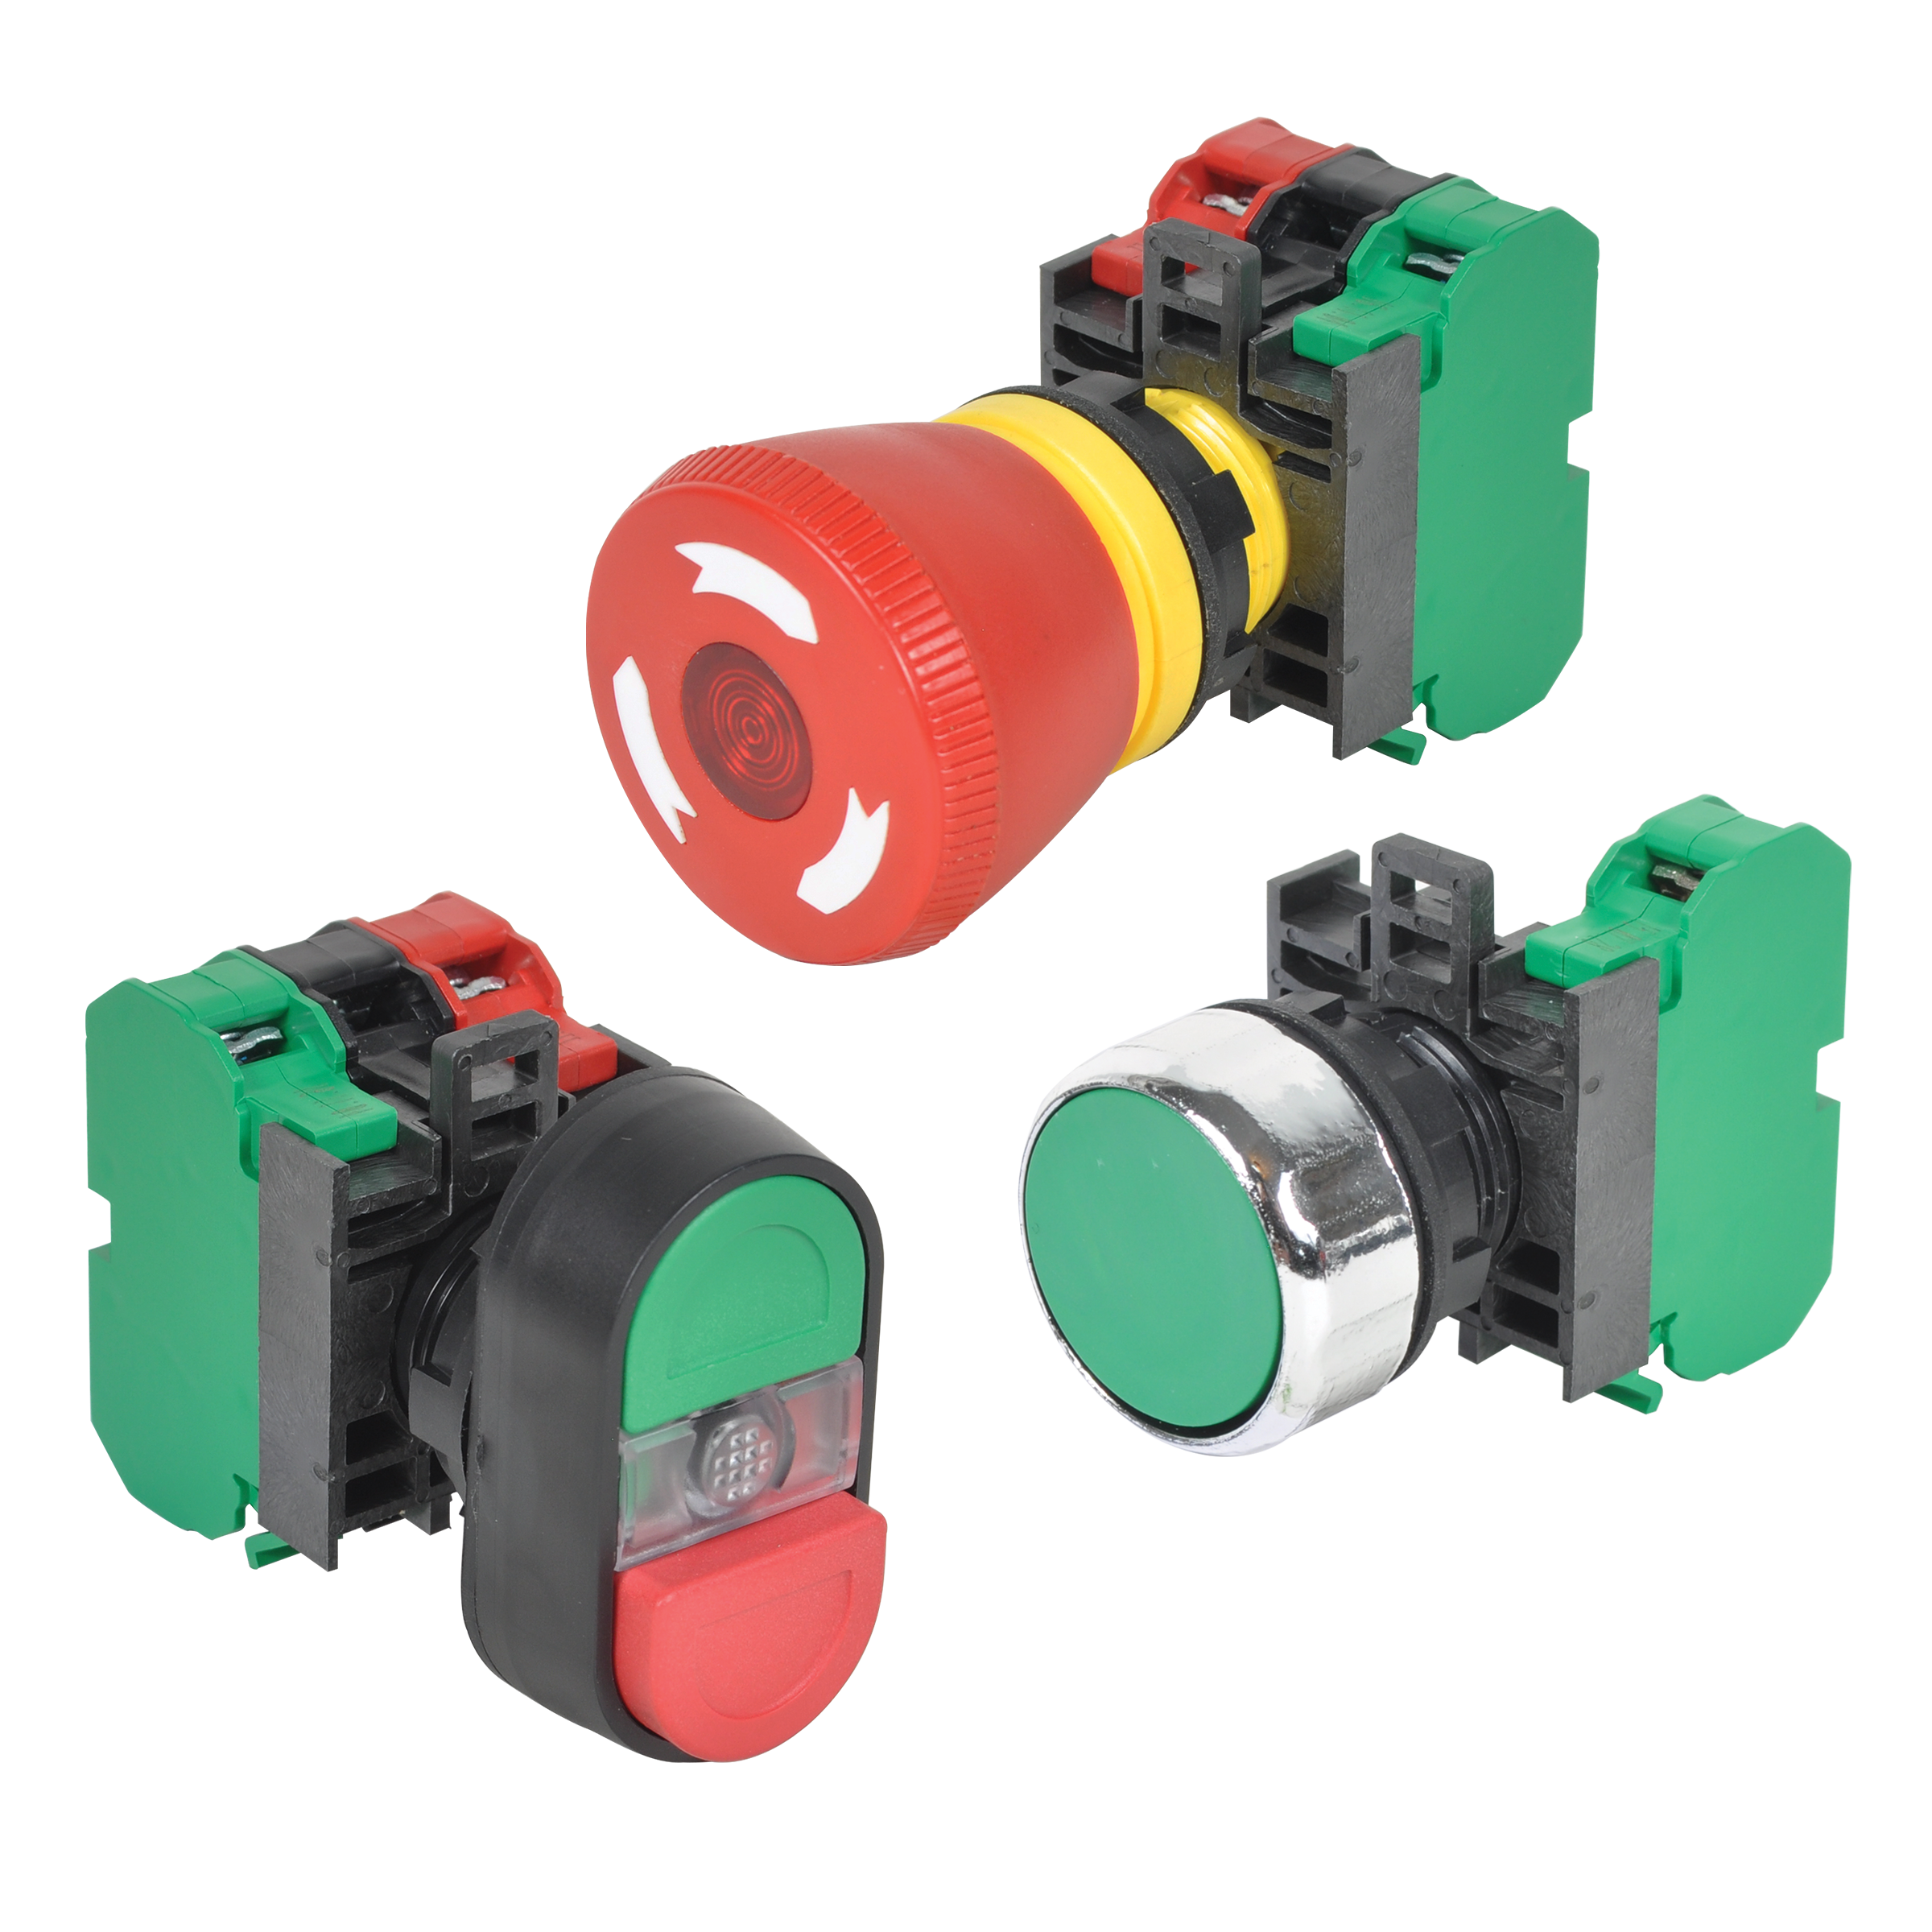 22mm IEC Push Buttons Pilot Devices with Snap-on Contact Blocks